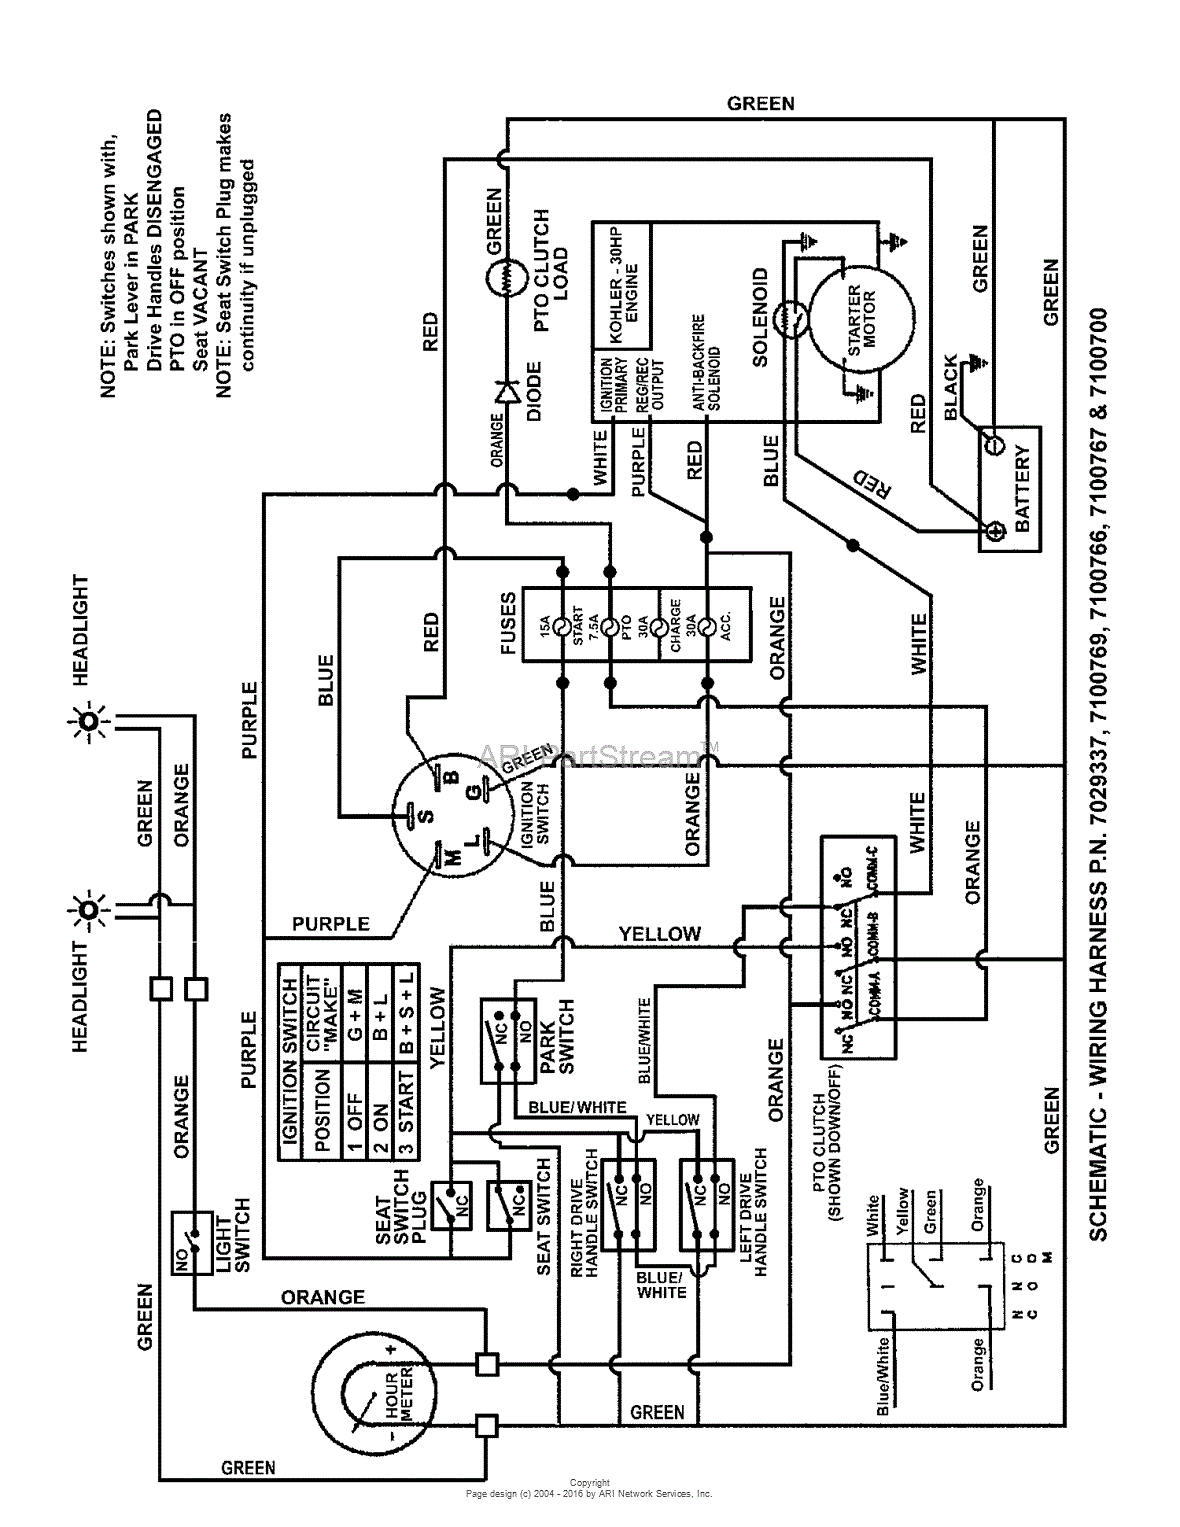 Briggs And Stratton Wiring Diagram 20 Hp from az417944.vo.msecnd.net